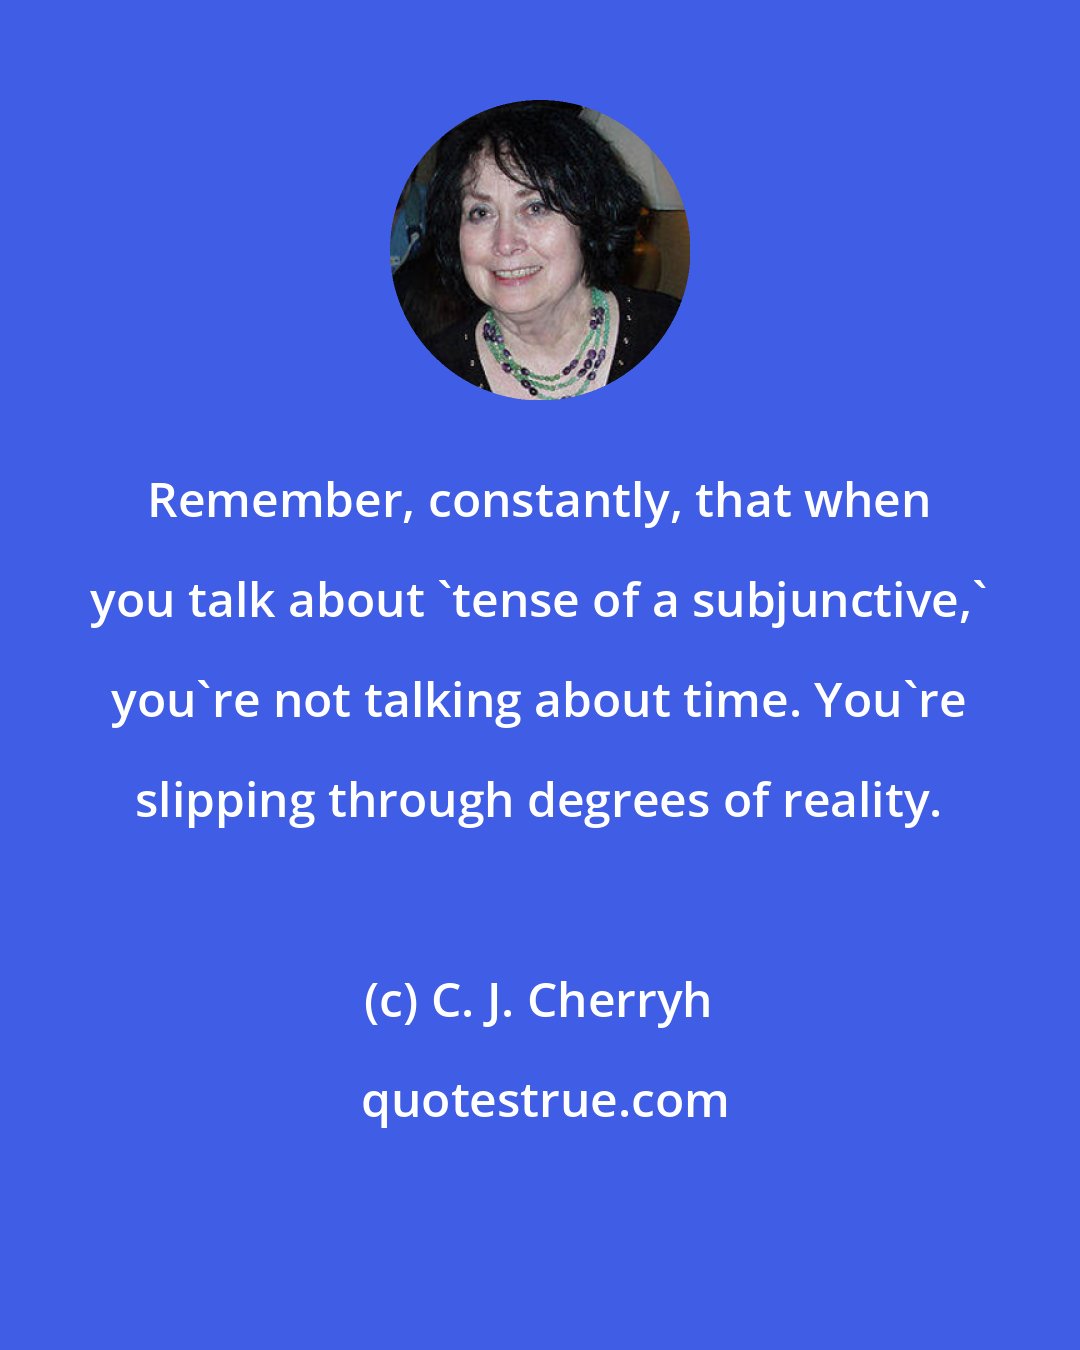 C. J. Cherryh: Remember, constantly, that when you talk about 'tense of a subjunctive,' you're not talking about time. You're slipping through degrees of reality.